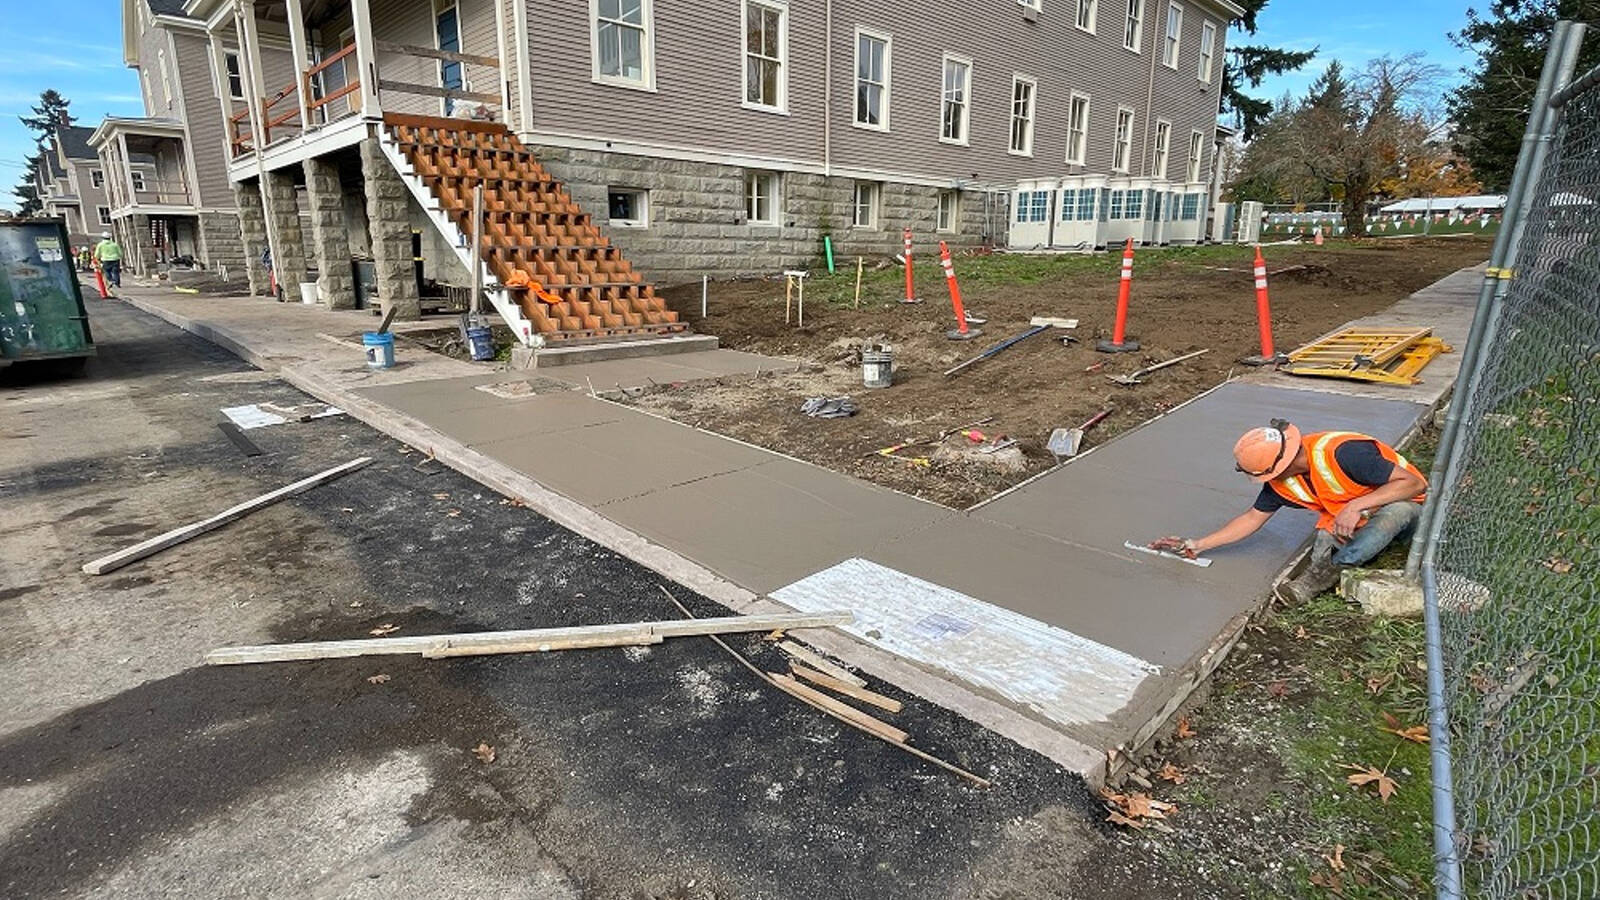 <p>Rehabilitation of parking areas, sidewalks and the historic main parade ground barracks building at Fort Vancouver National Historic Site in Washington State. This work will continue to adapt the historic military site for public use and improve accessibility. </p>